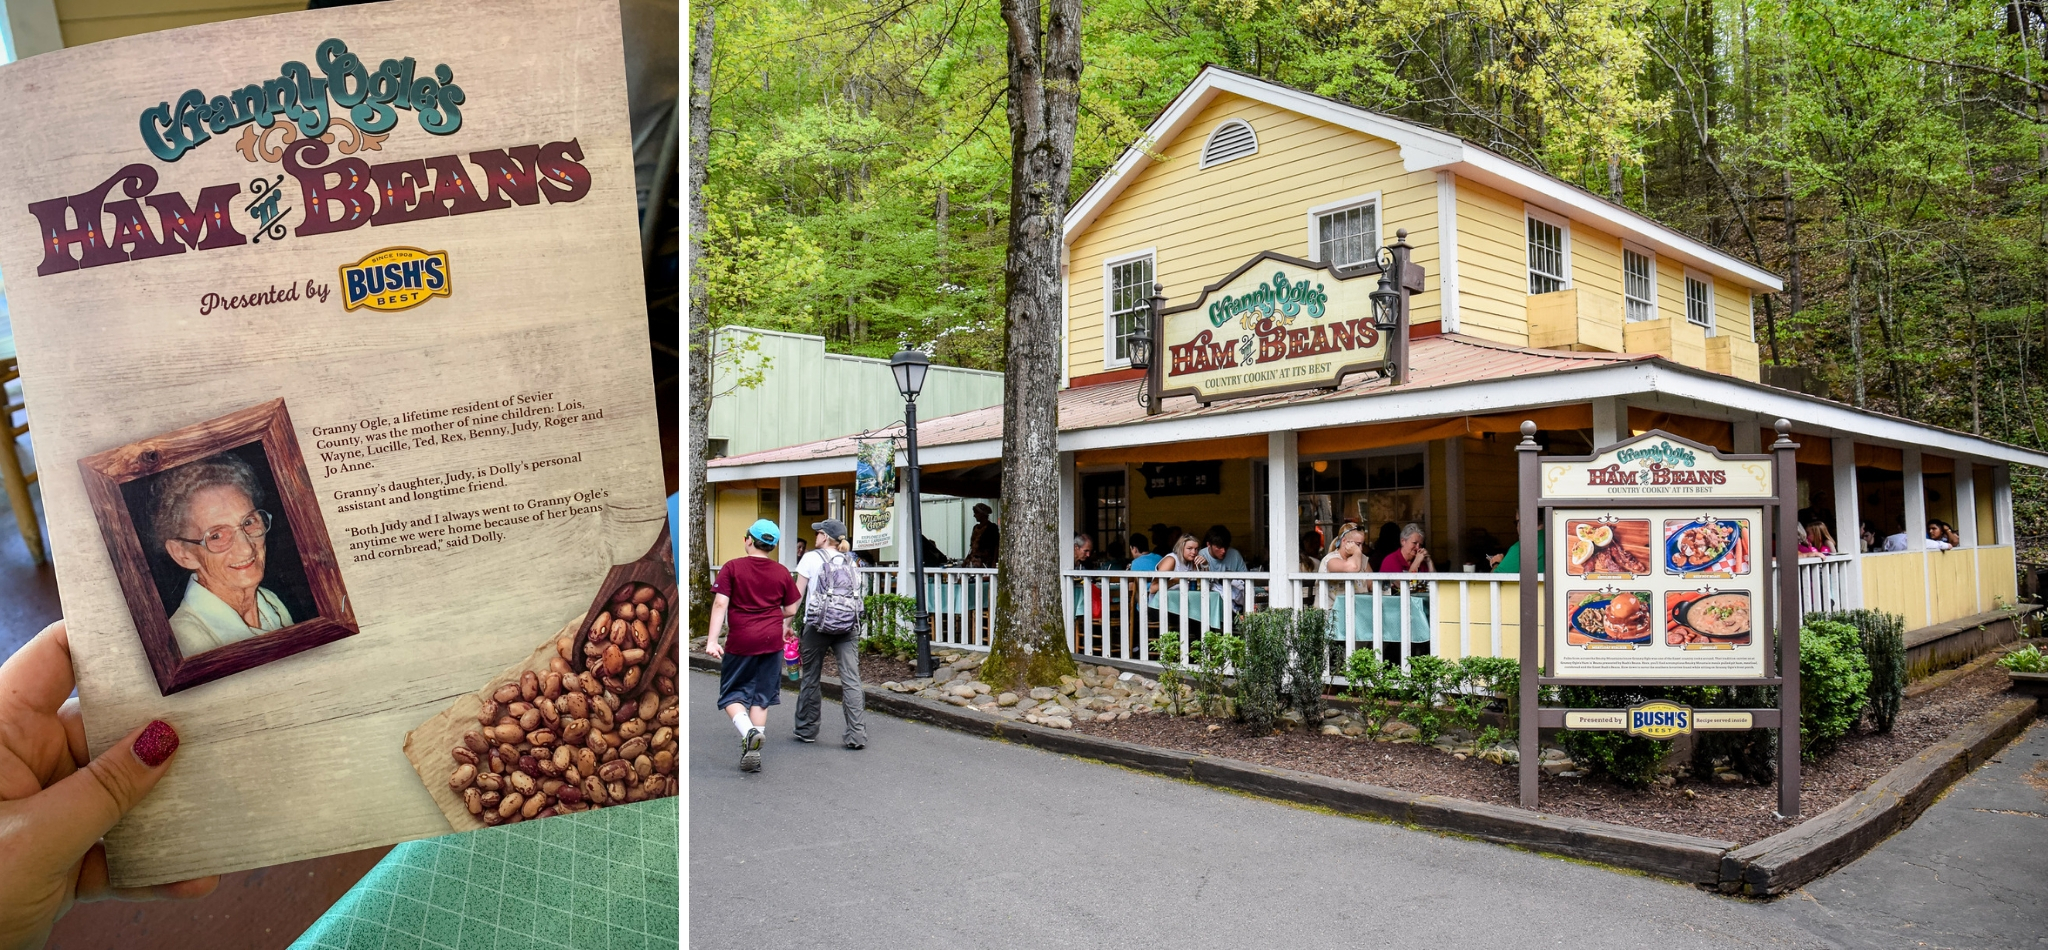 What to eat at Dollywood